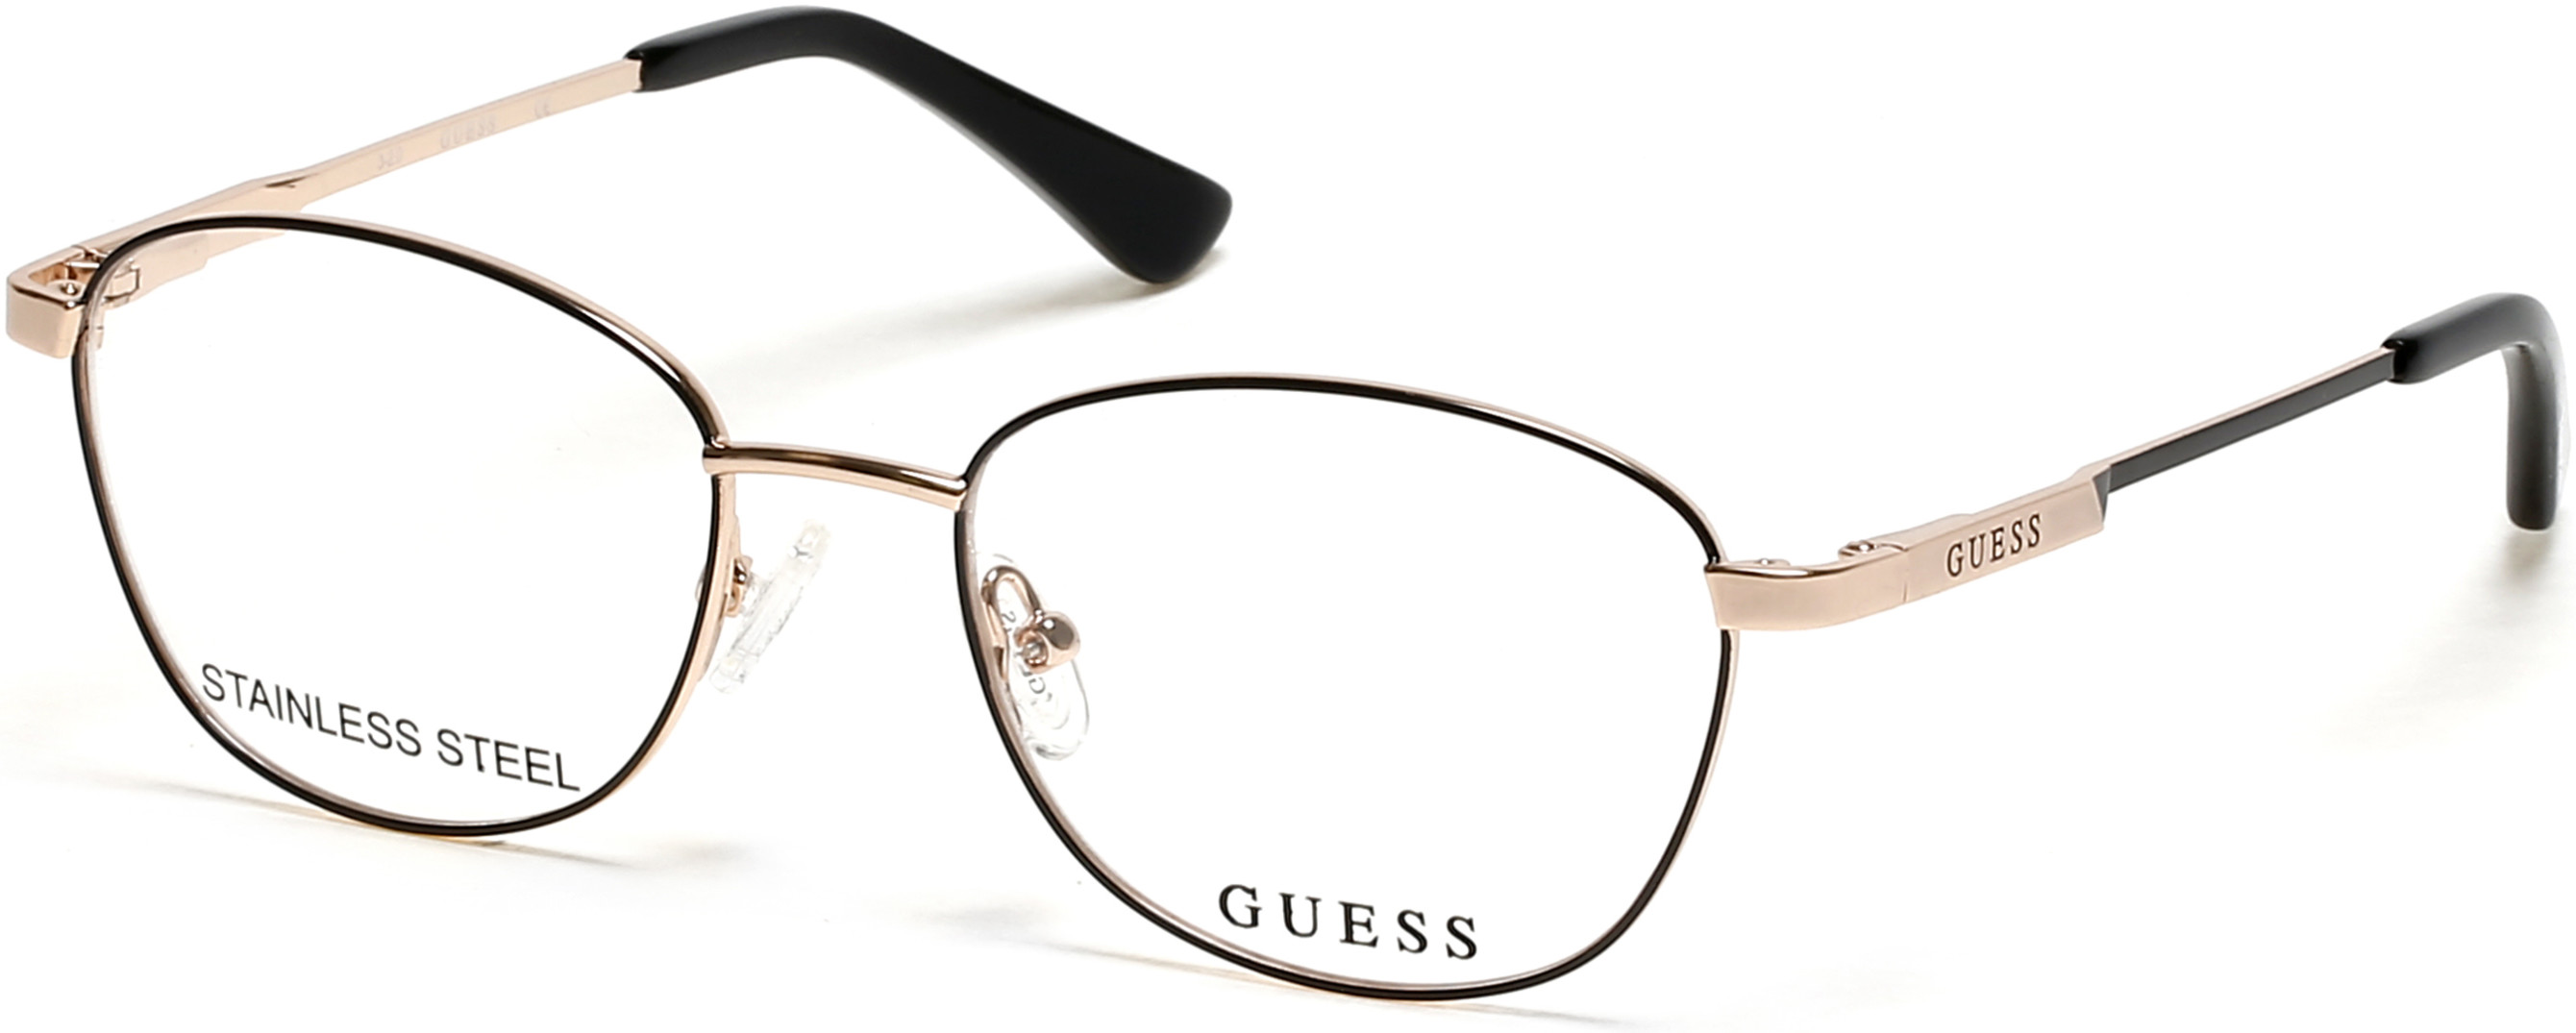 GUESS 9204 005